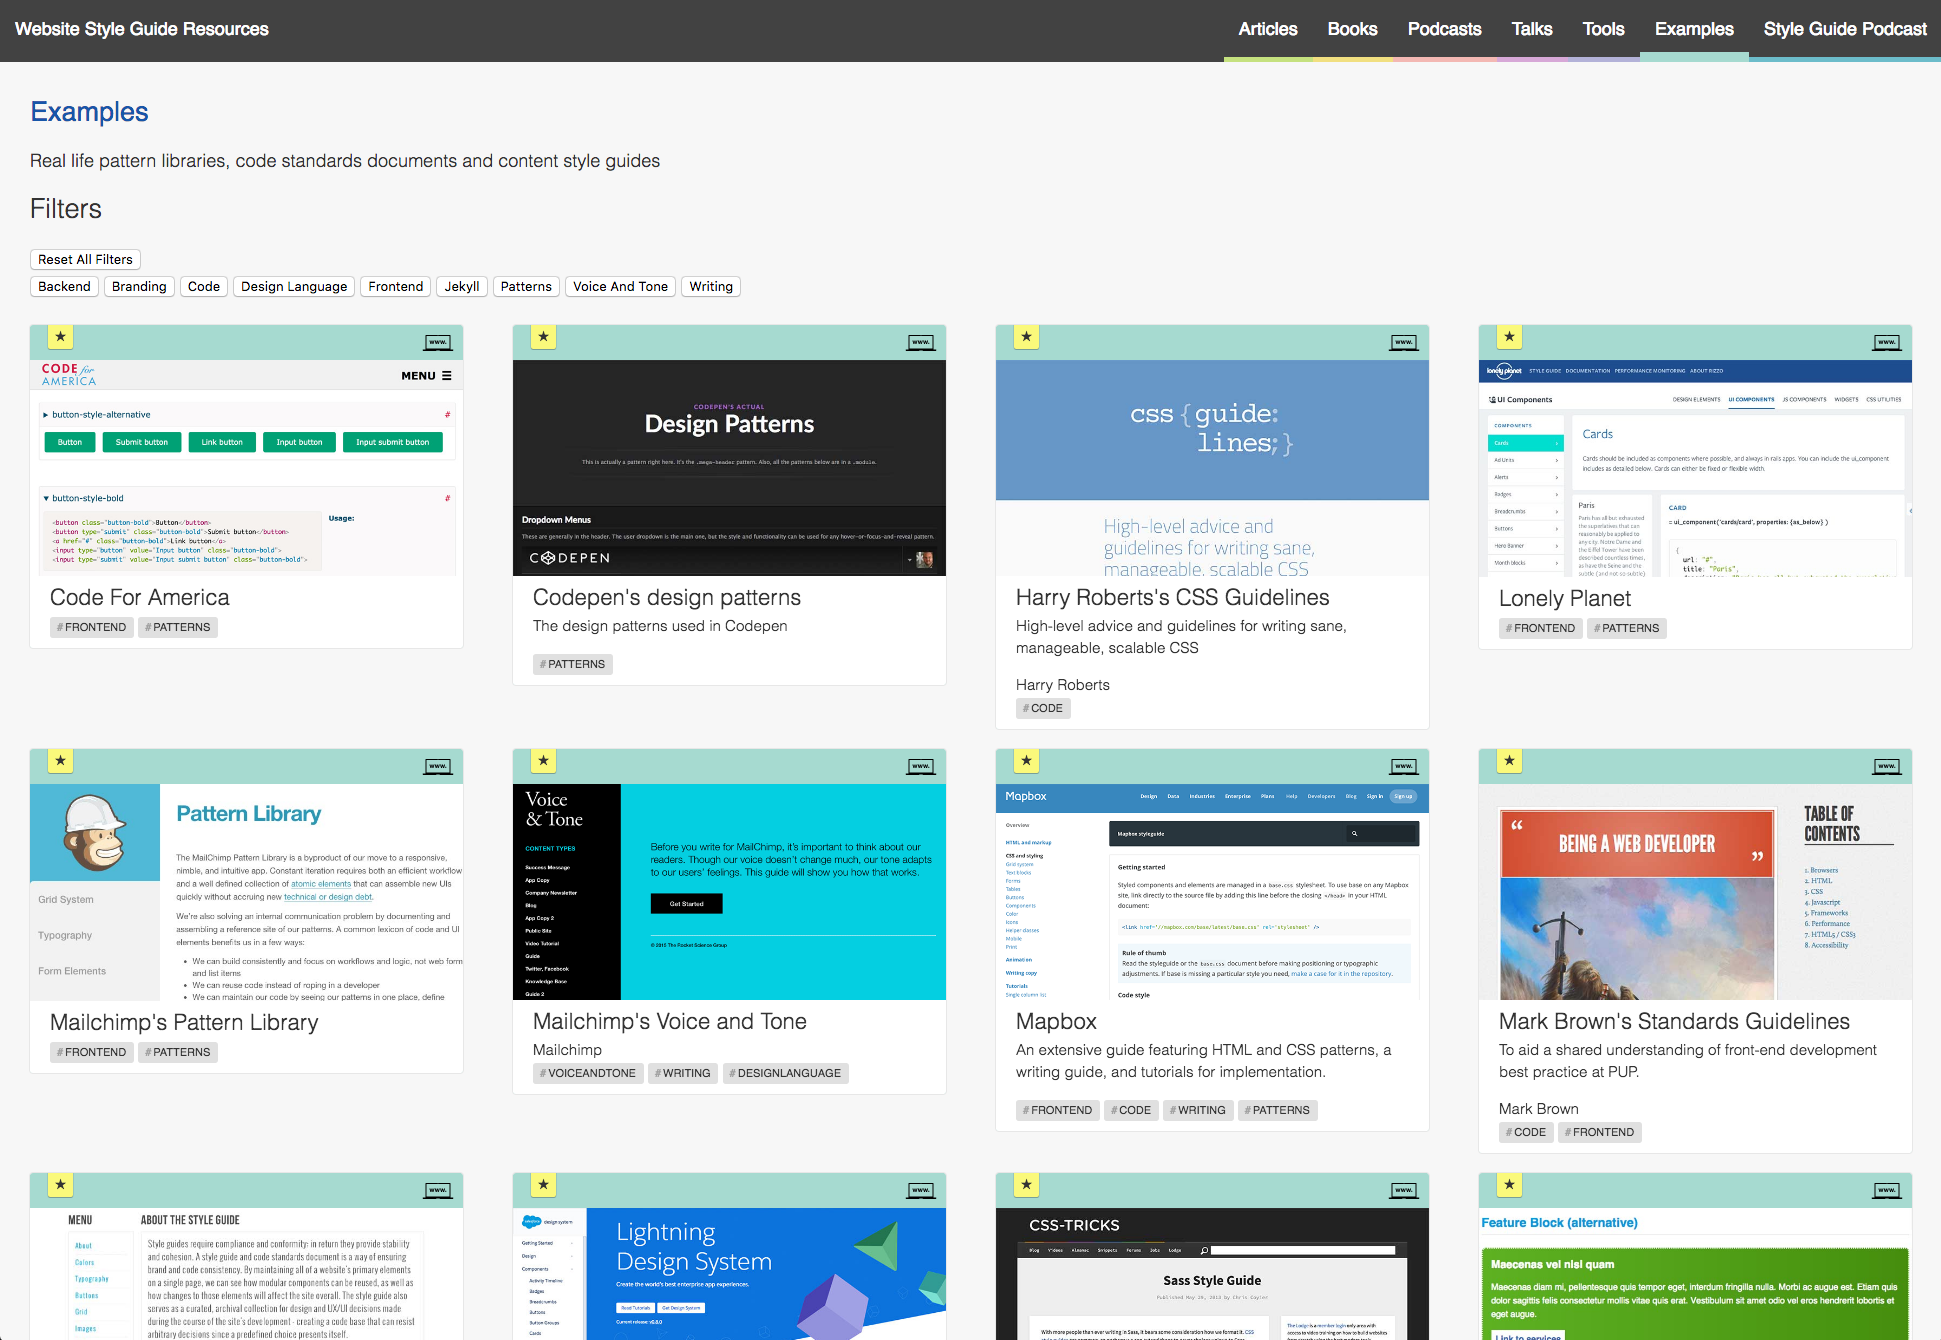 Styleguides.io rounds up over 150 public-facing style guides from organizations across the world.